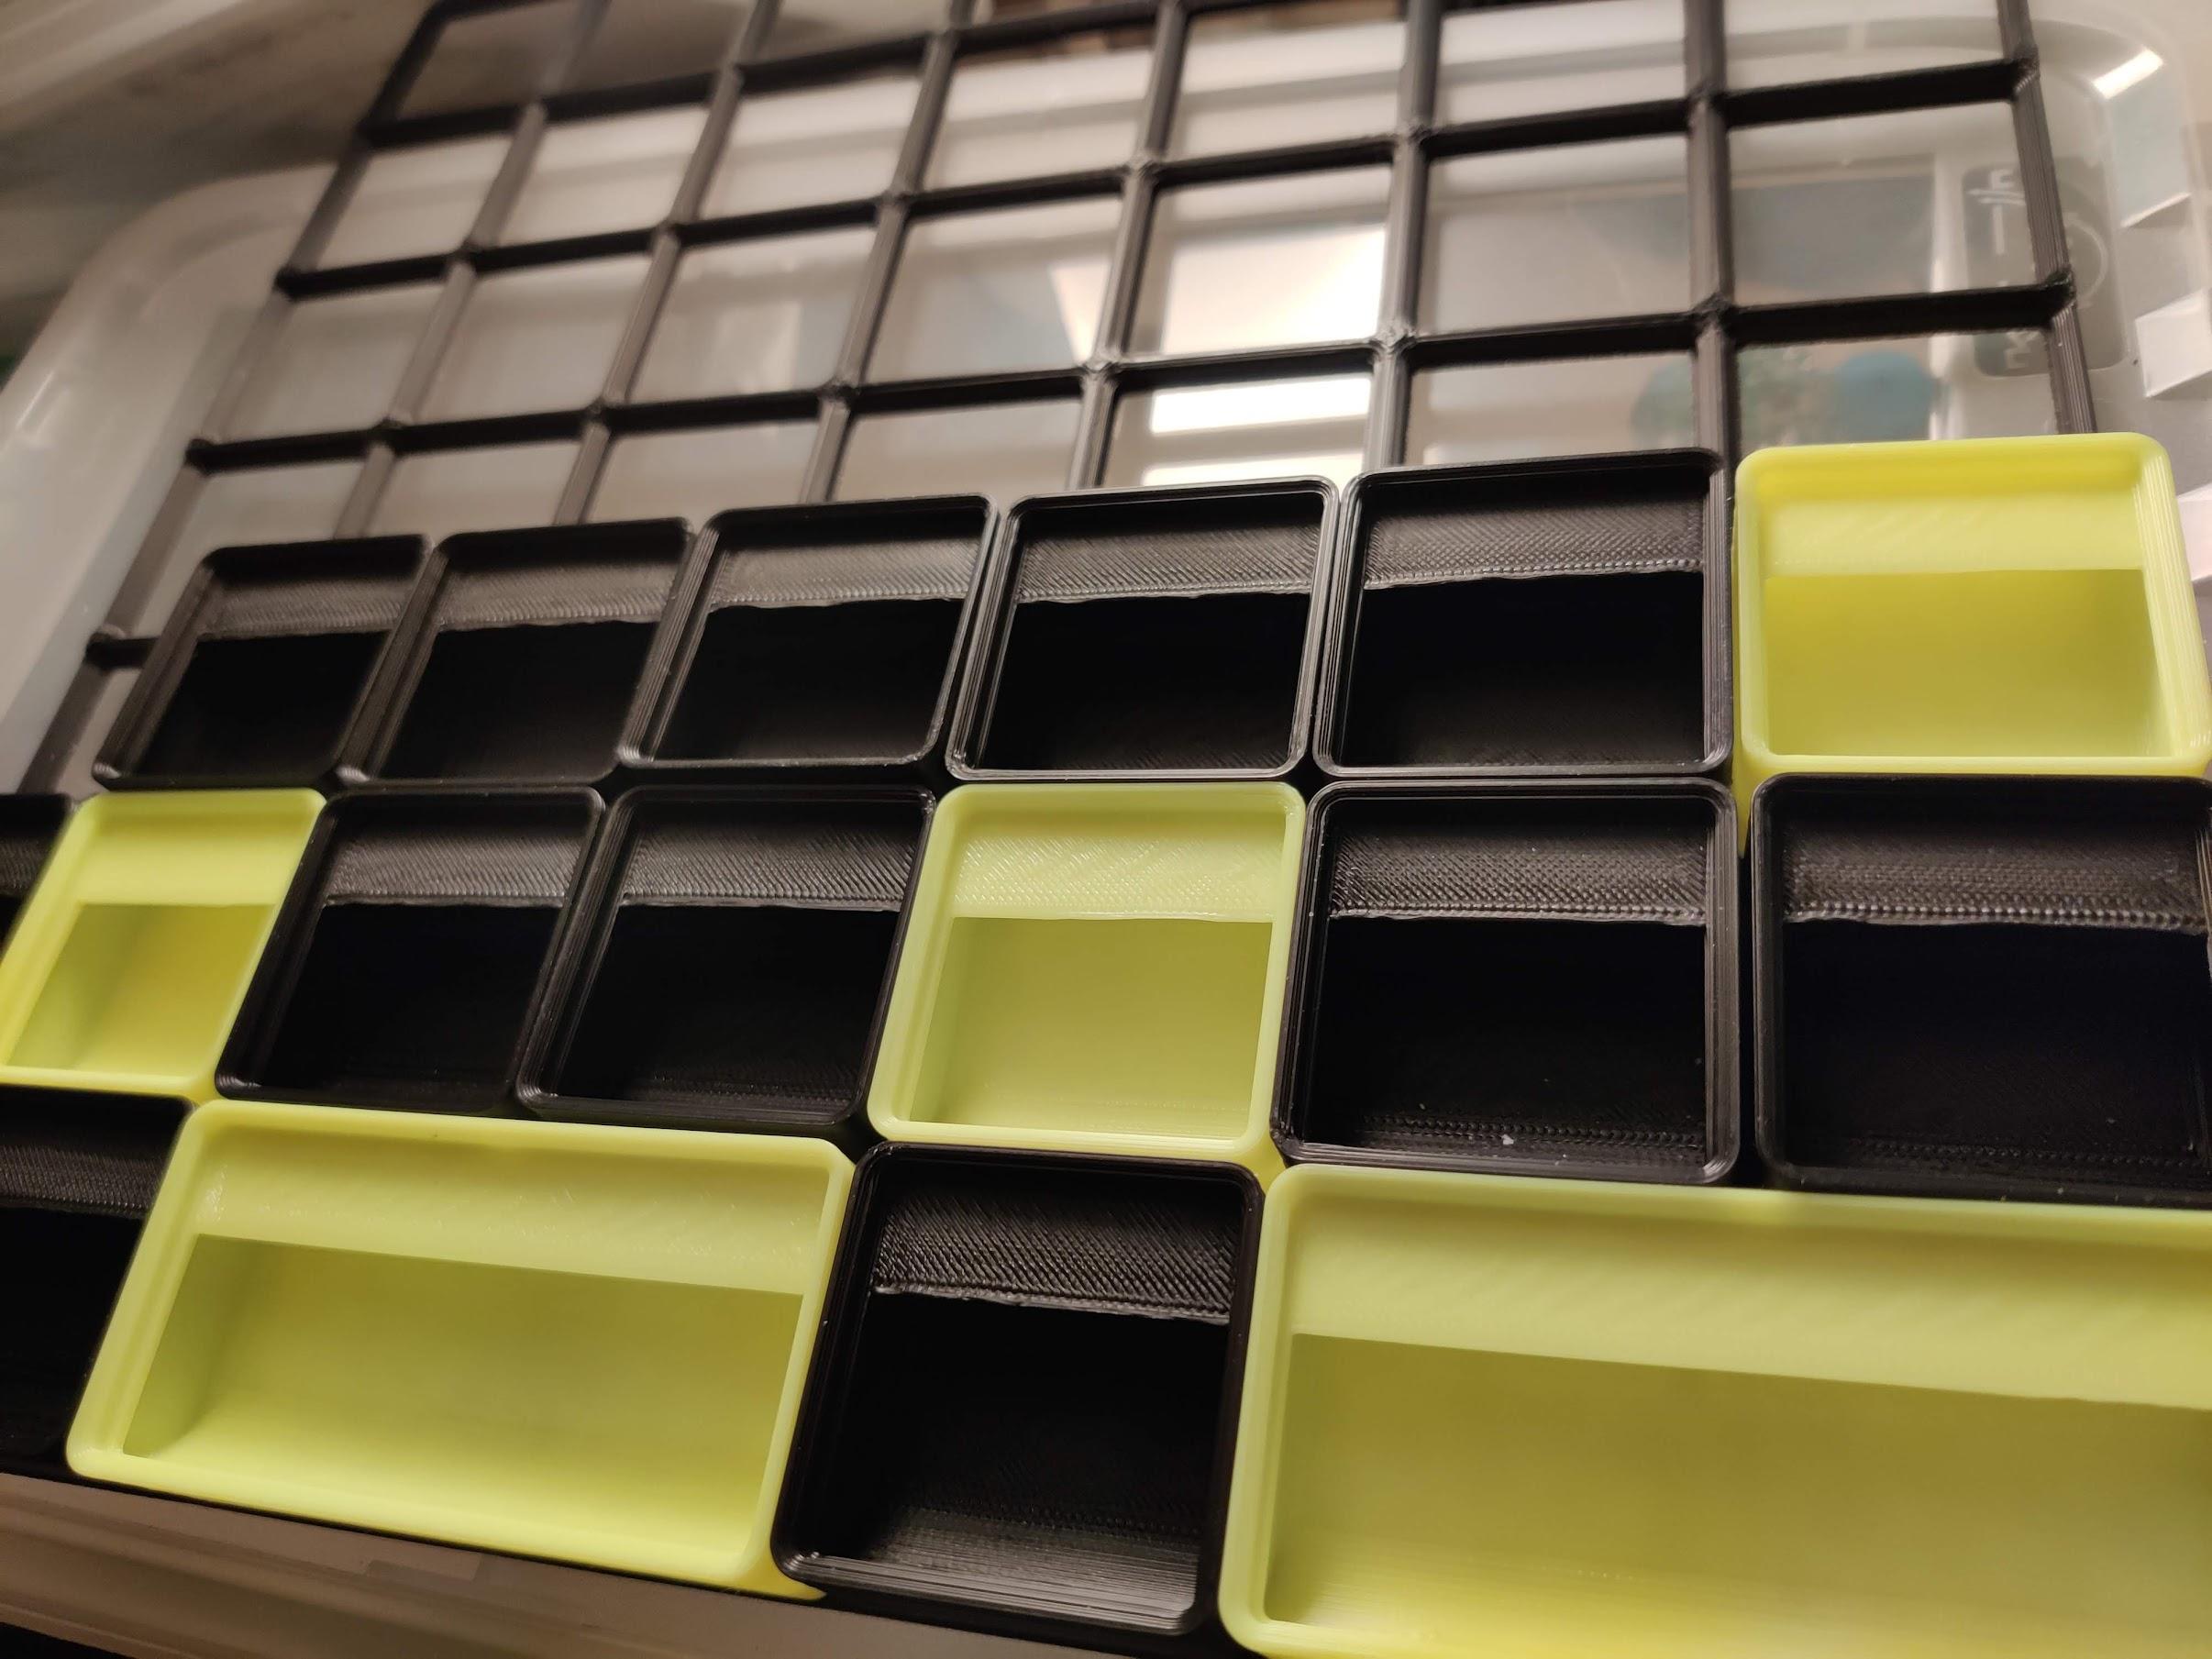 Labeling interior bins in small parts organizers : r/Tools